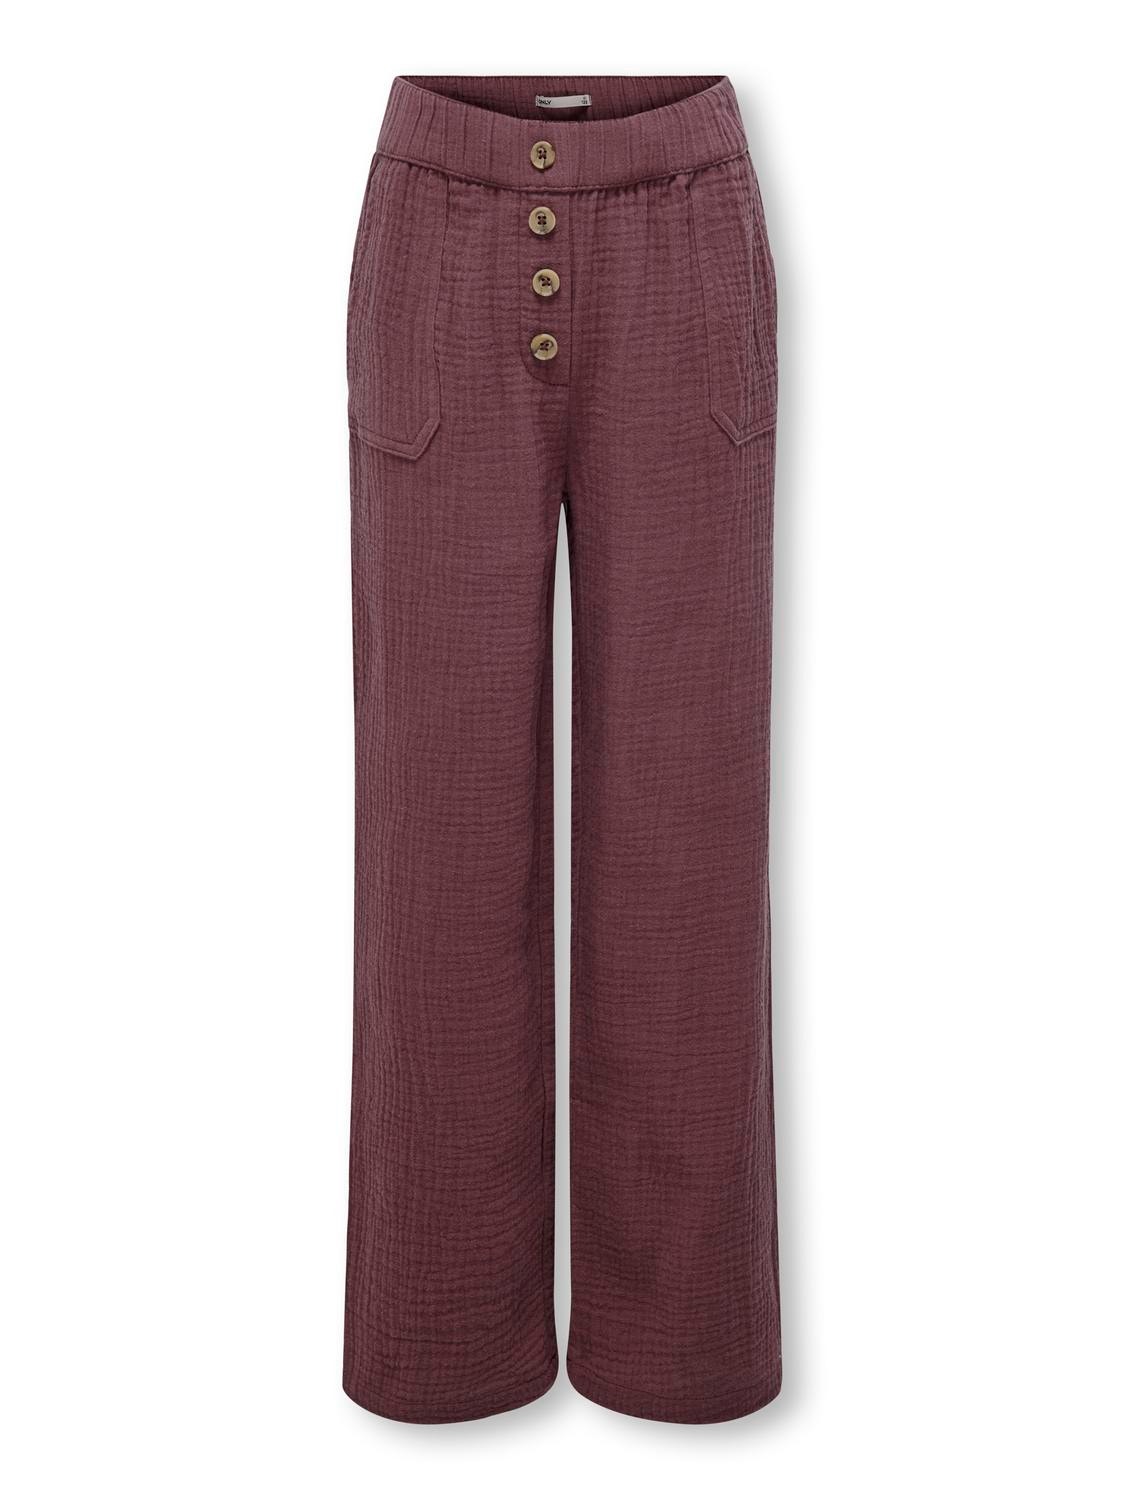 ONLY Regular Fit Trousers -Rose Brown - 15251518